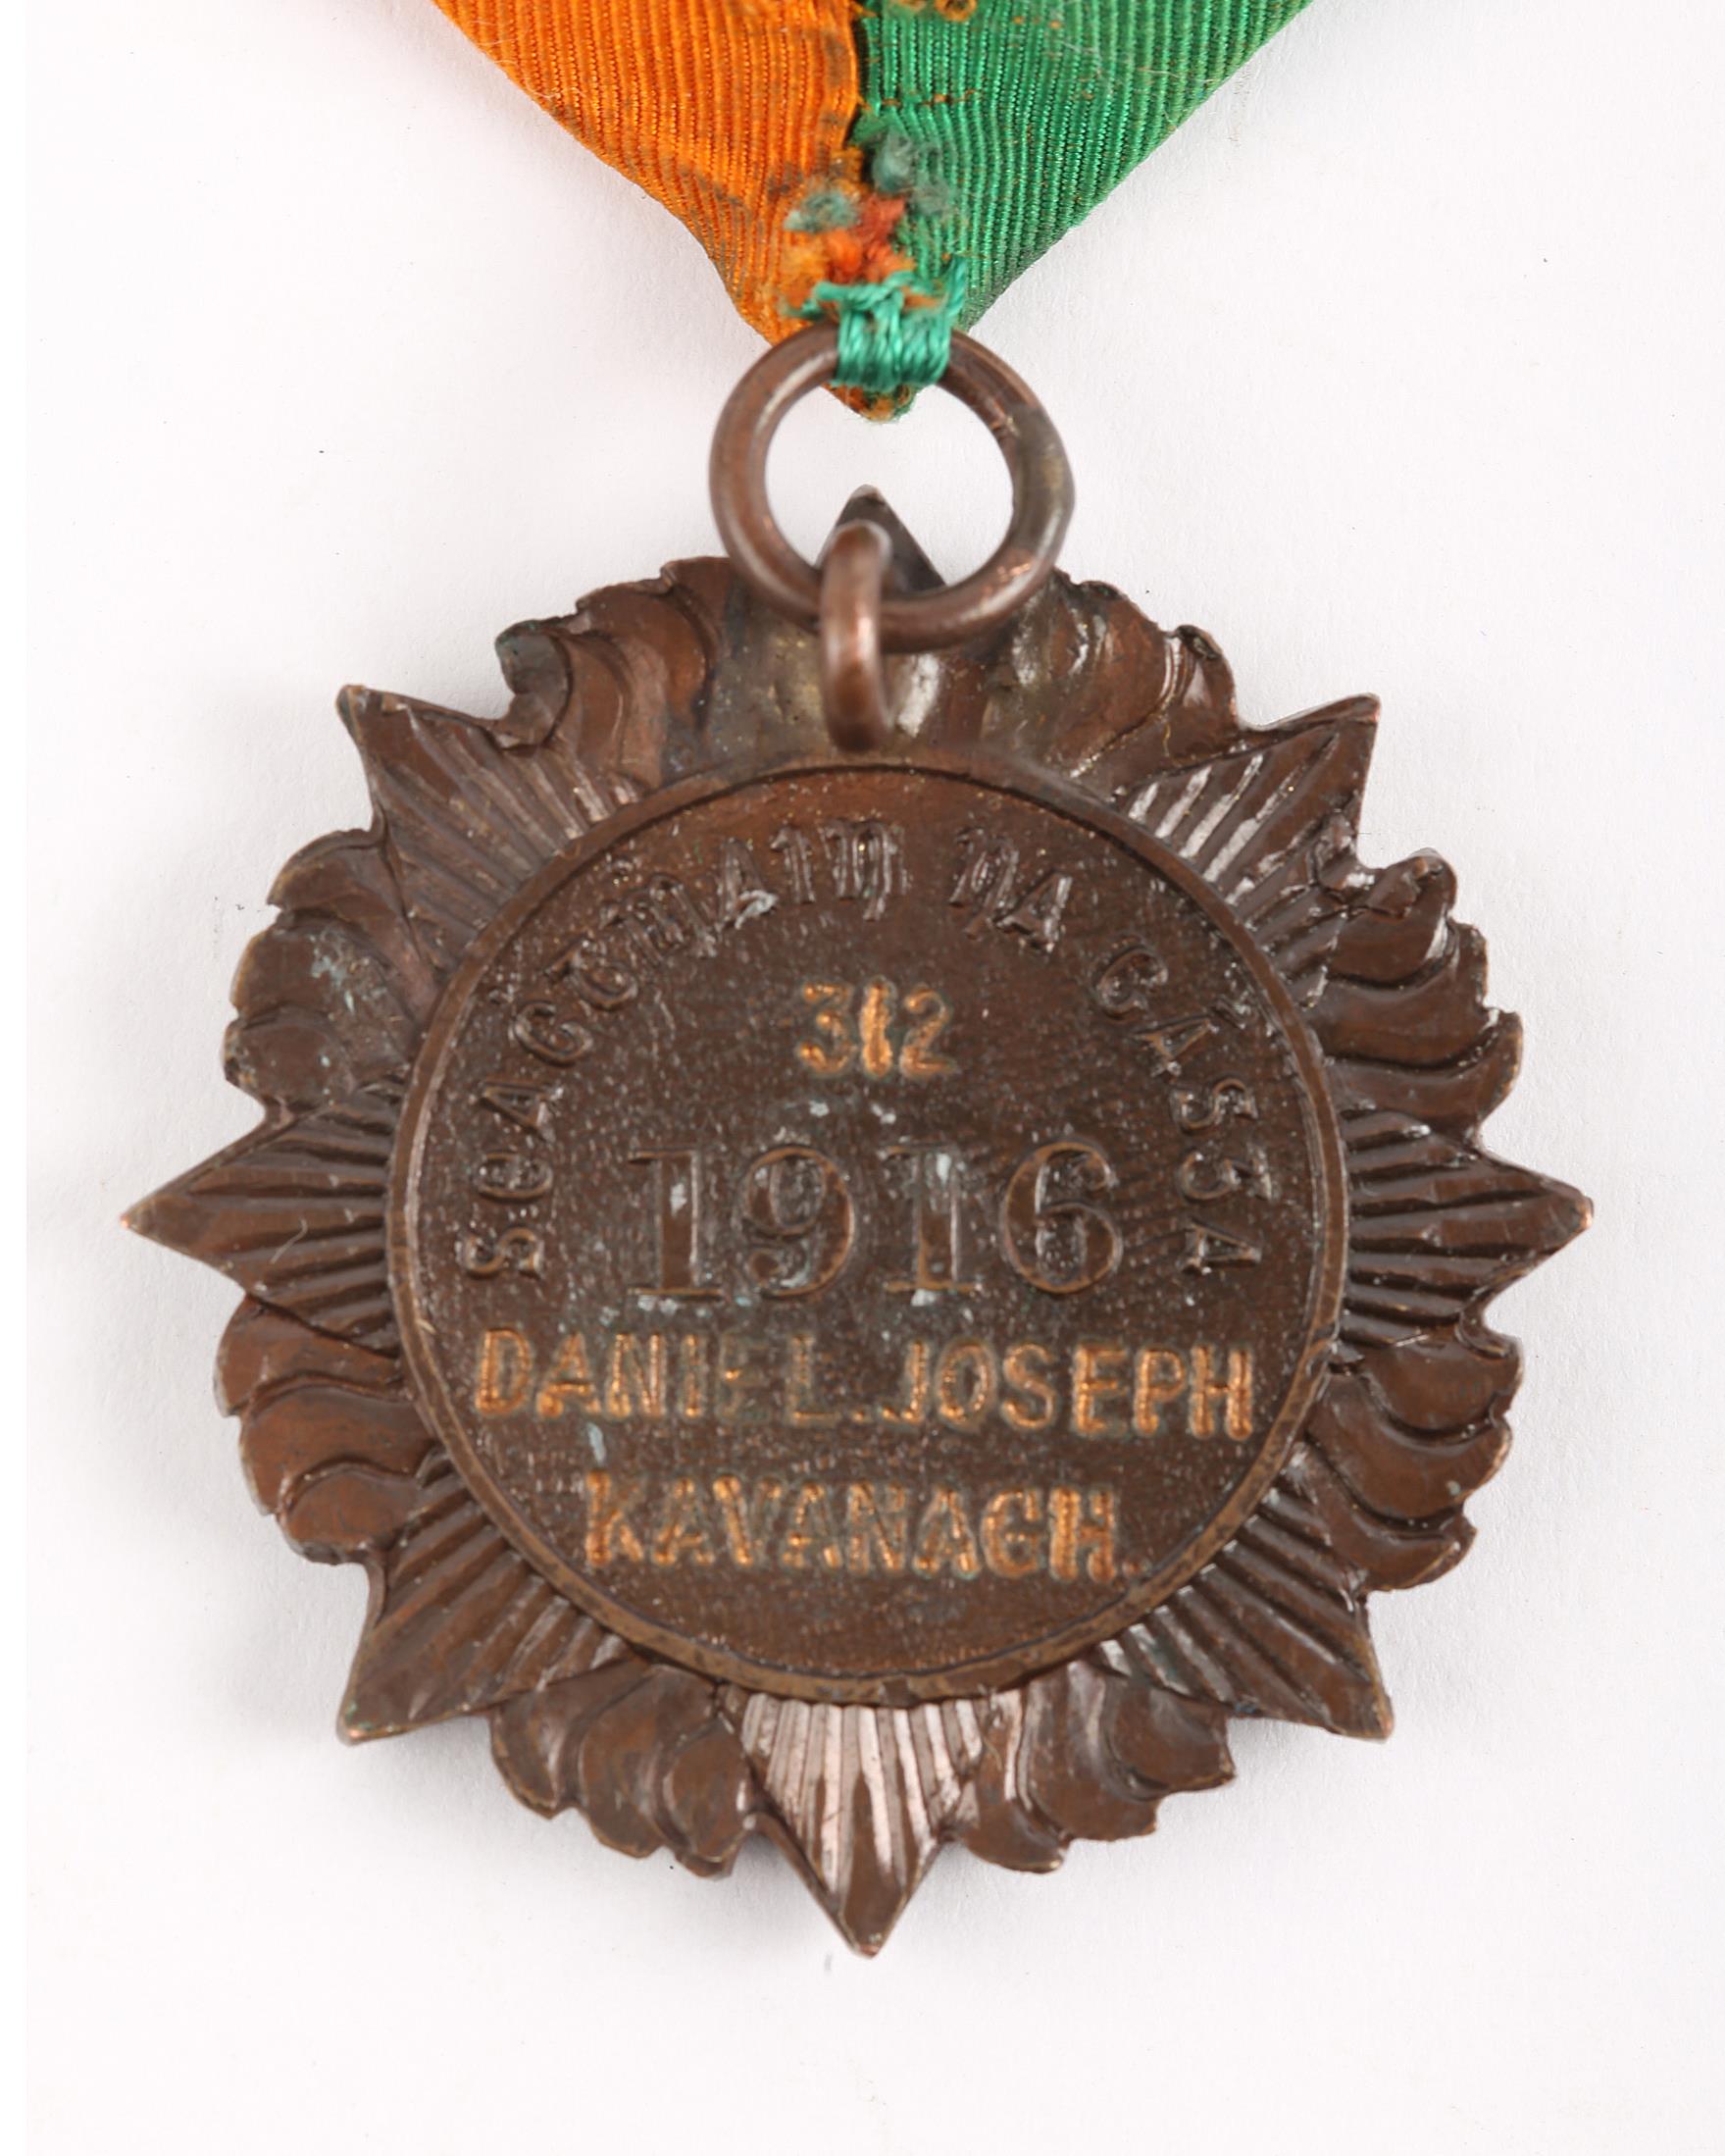 1916 Rising Service medal, officially named and numbered to Daniel Joseph Kavanagh, 312, Jacob's - Image 2 of 2